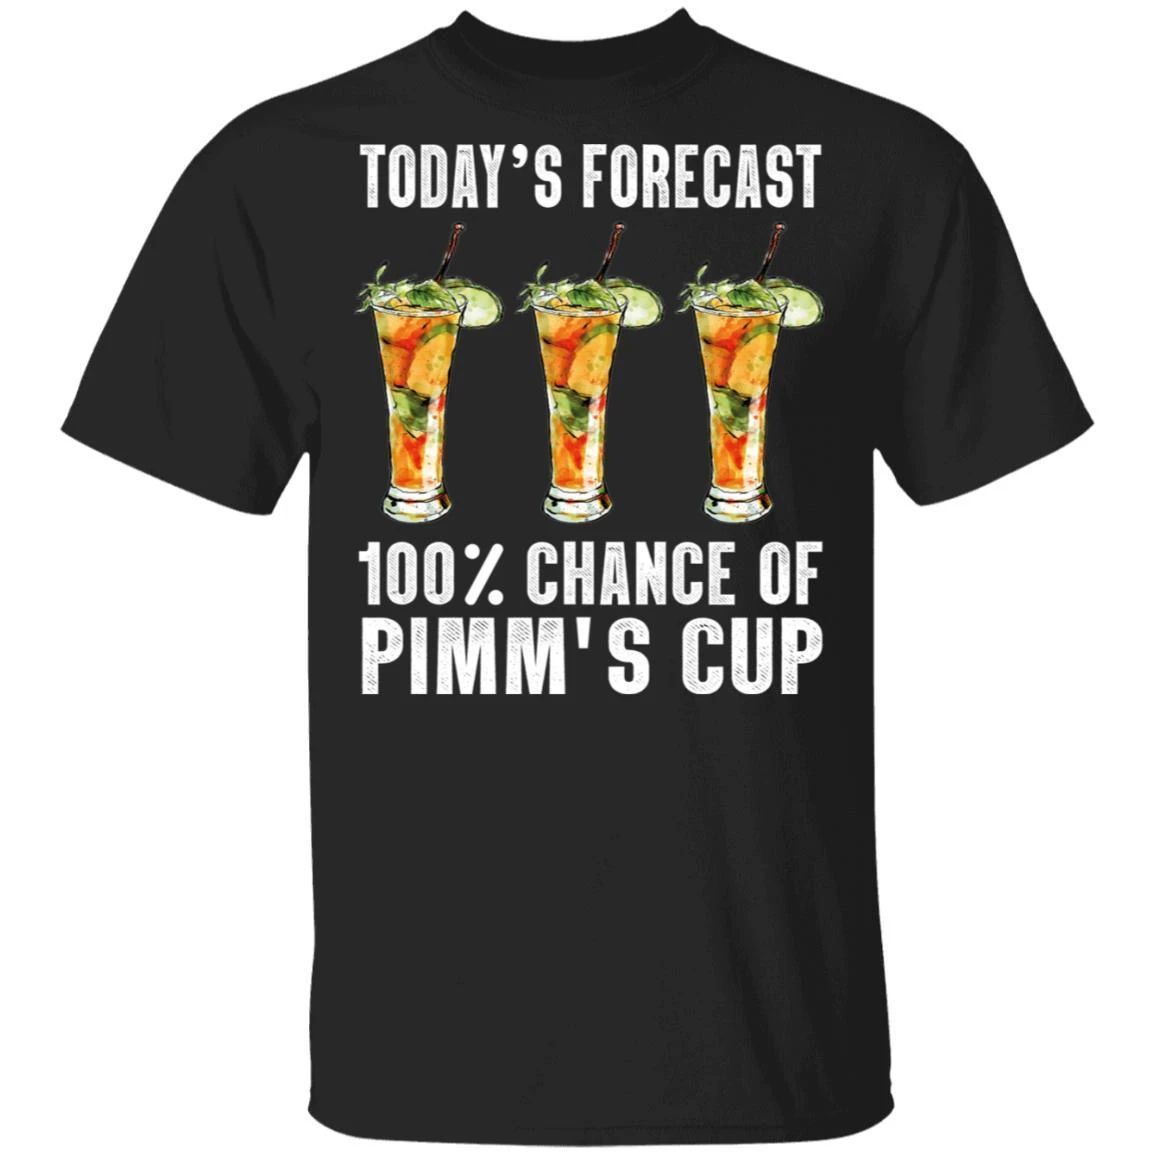 Today’s Forecast 100% Pimms Cup T-shirt Cocktail Tee